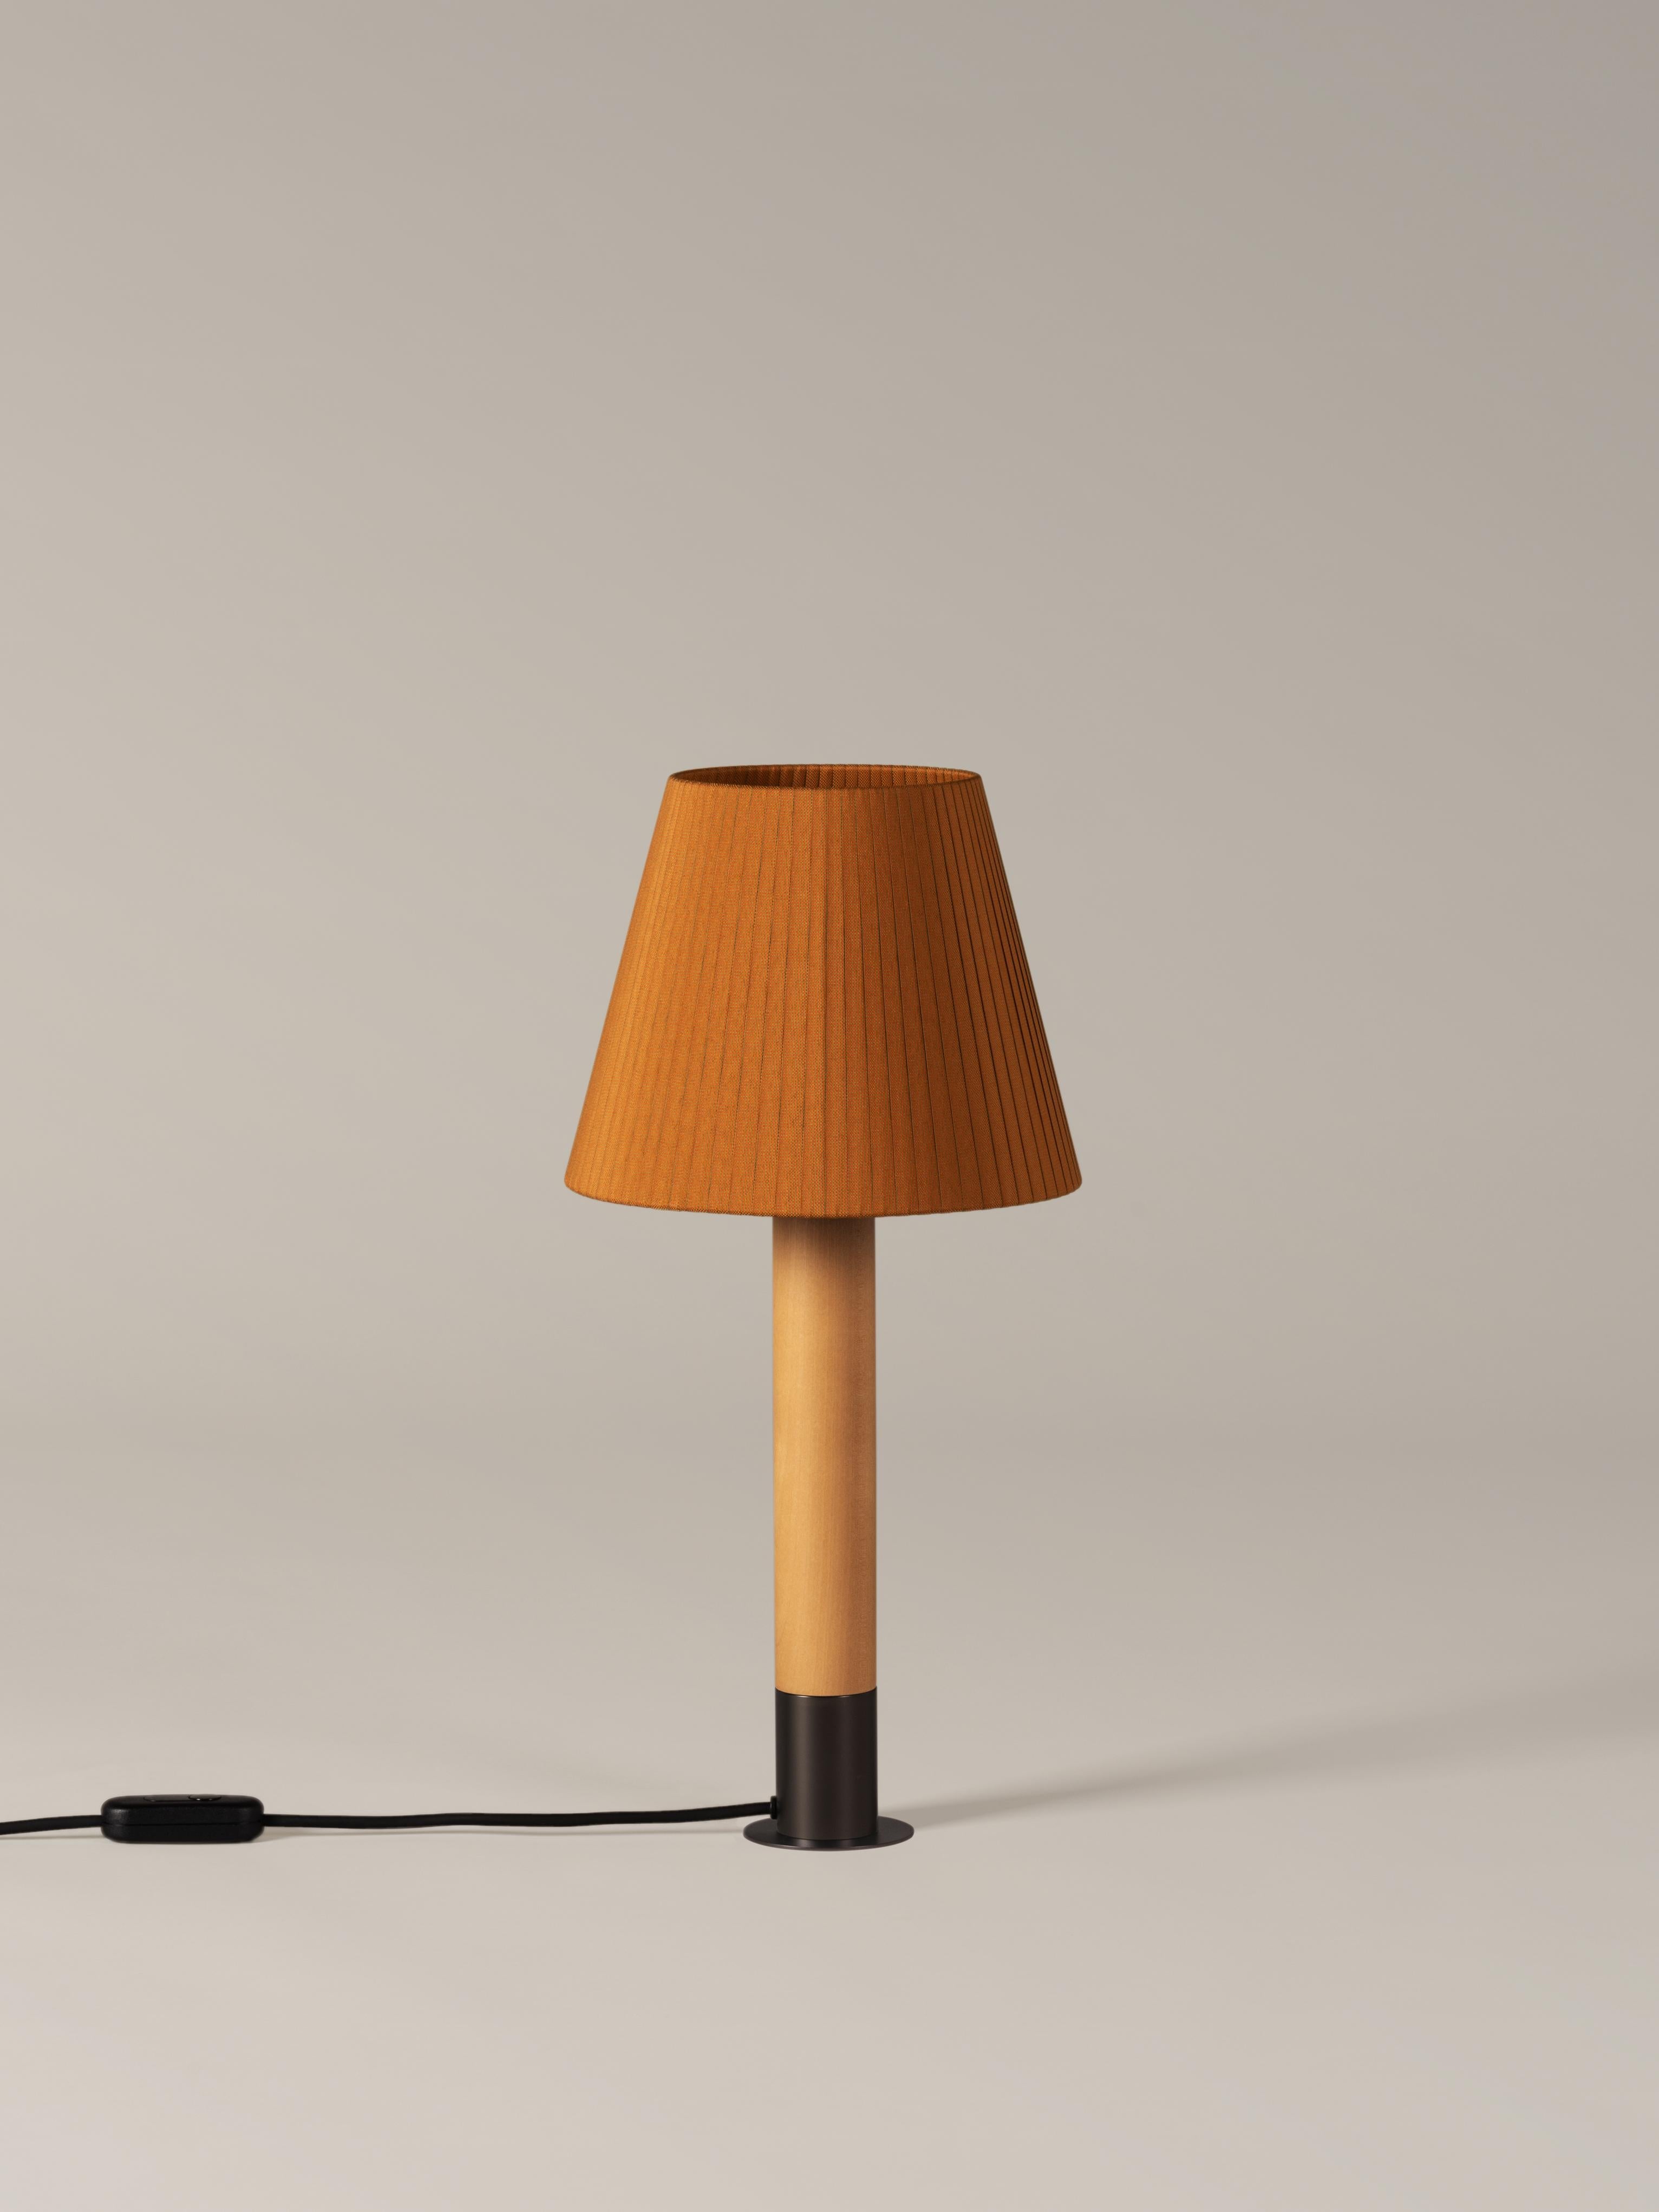 Bronze and mustard básica M1 table lamp by Santiago Roqueta, Santa & Cole
Dimensions: D 25 x H 52 cm
Materials: Bronze, birch wood, ribbon.
Available in other shade colors and with or without the stabilizing disc.
Available in nickel or